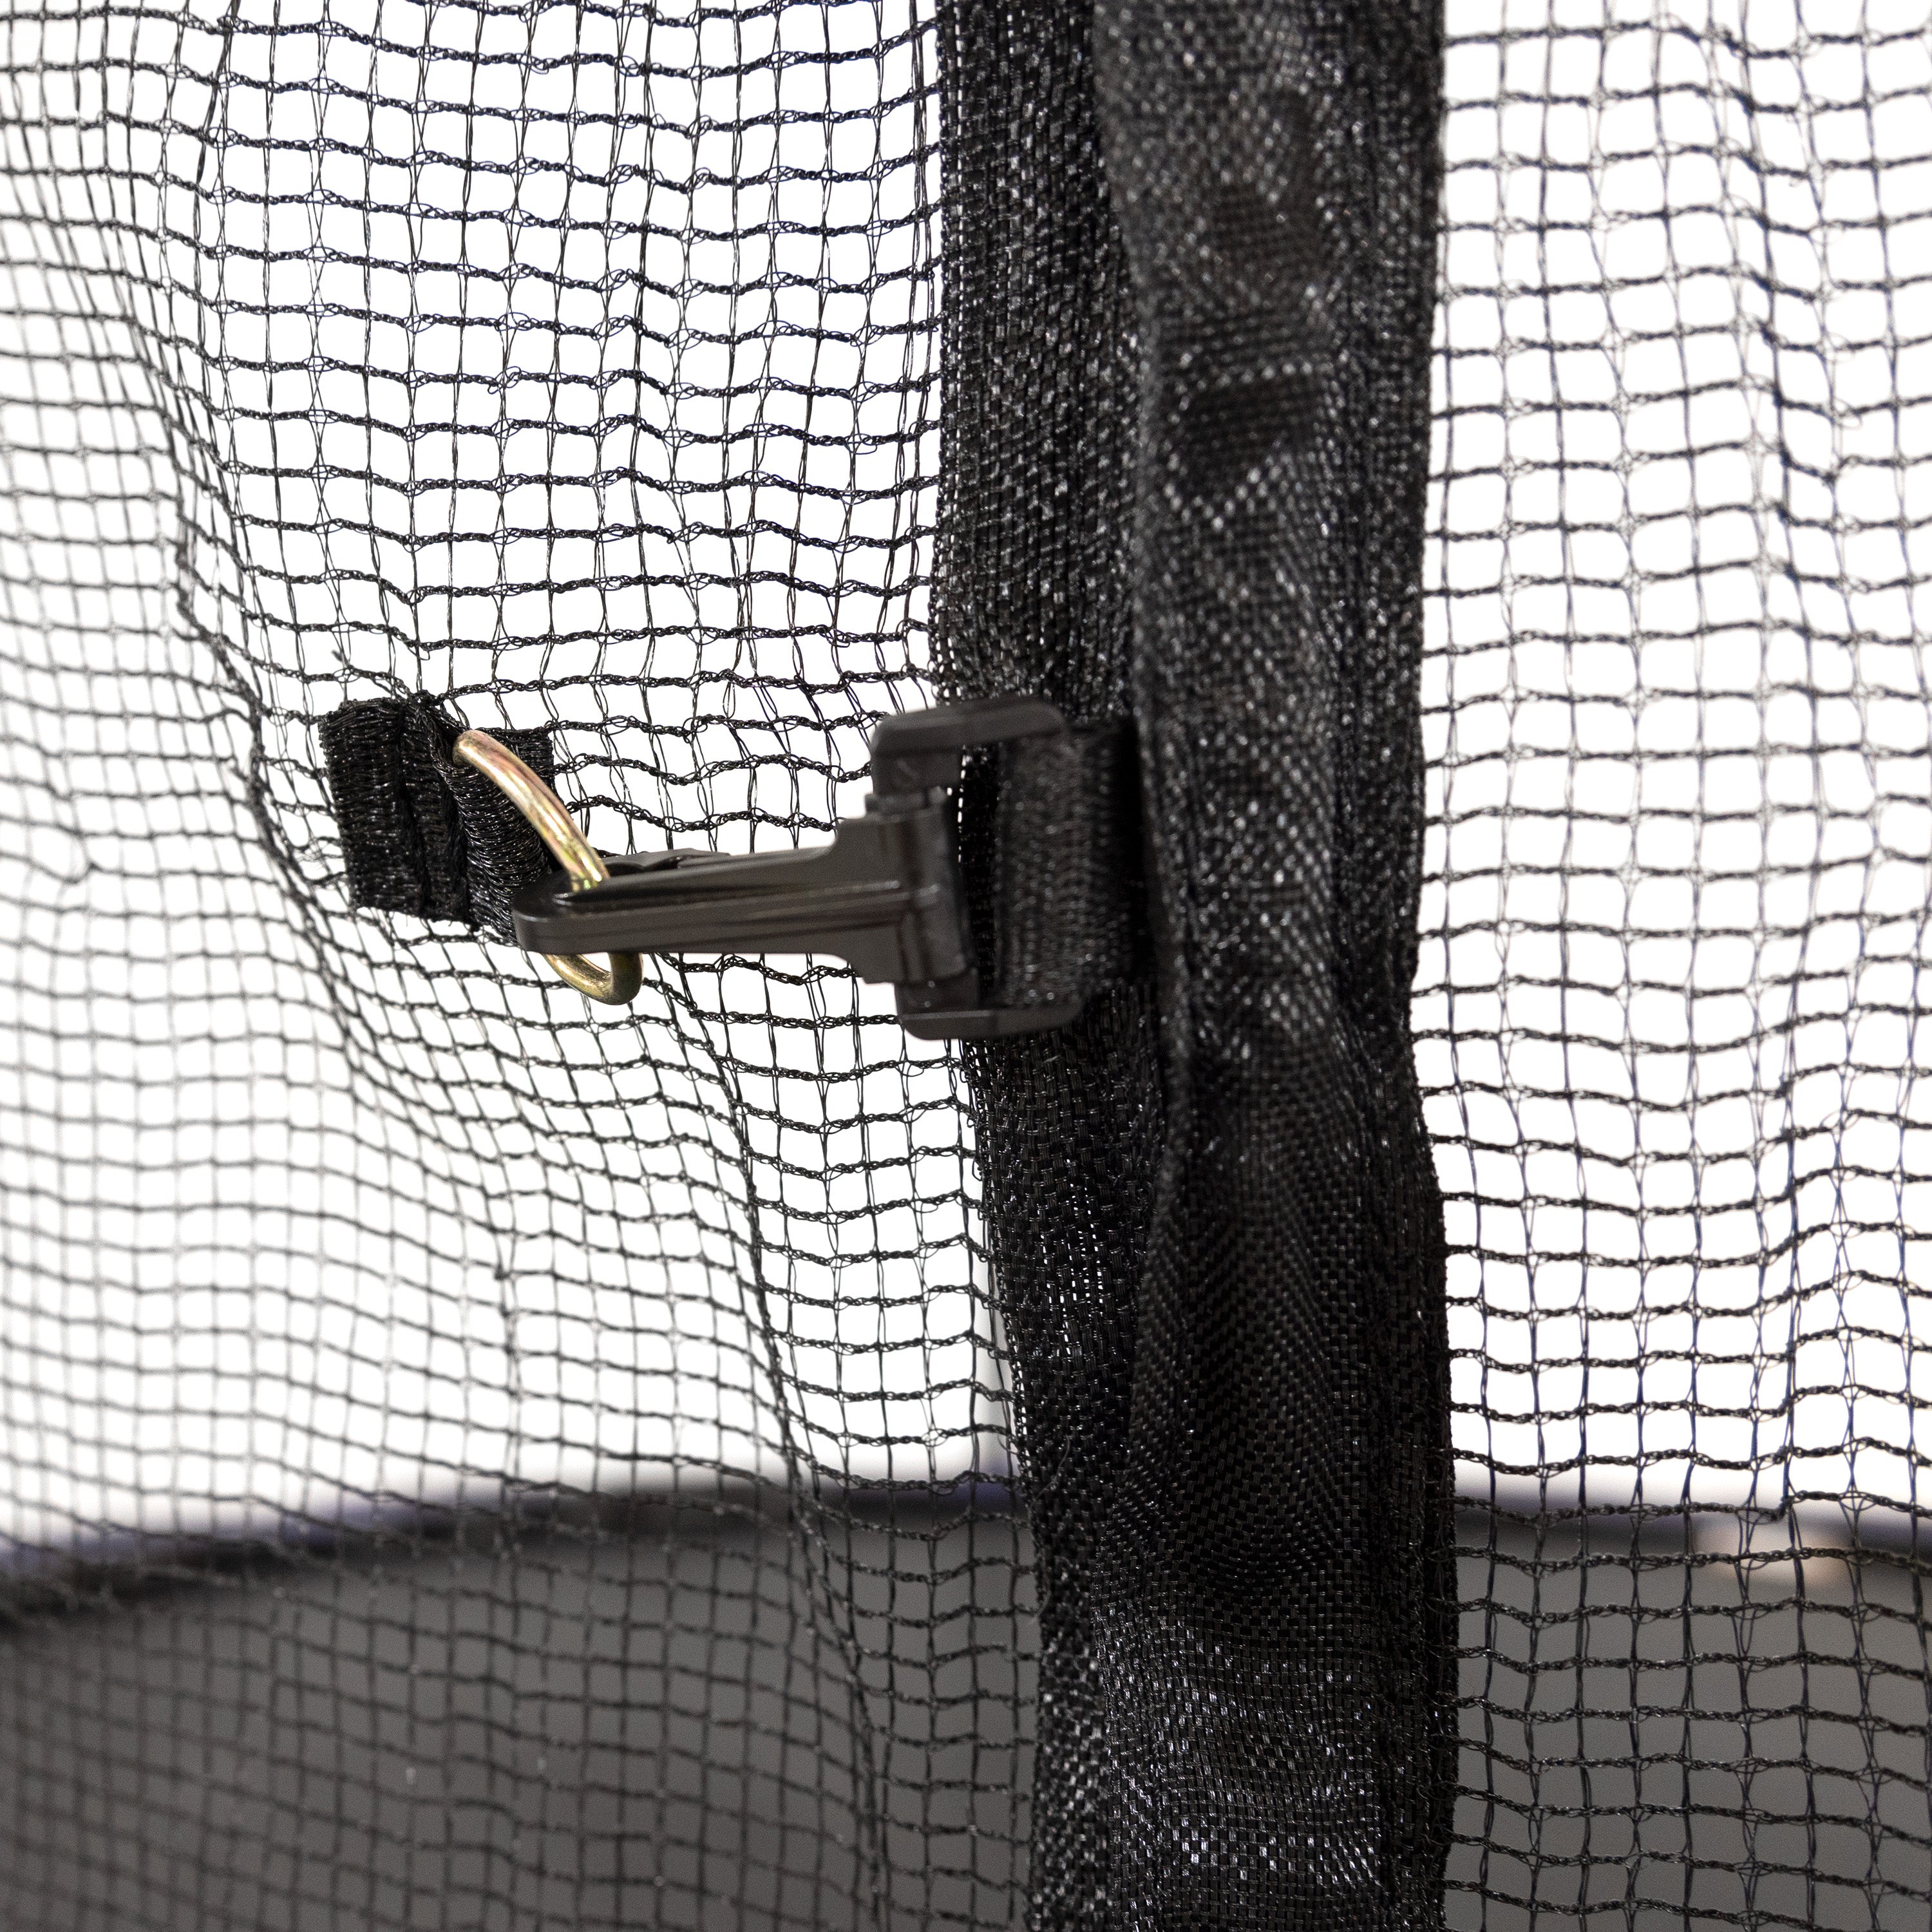 A black clip helps hold the enclosure net shut. 